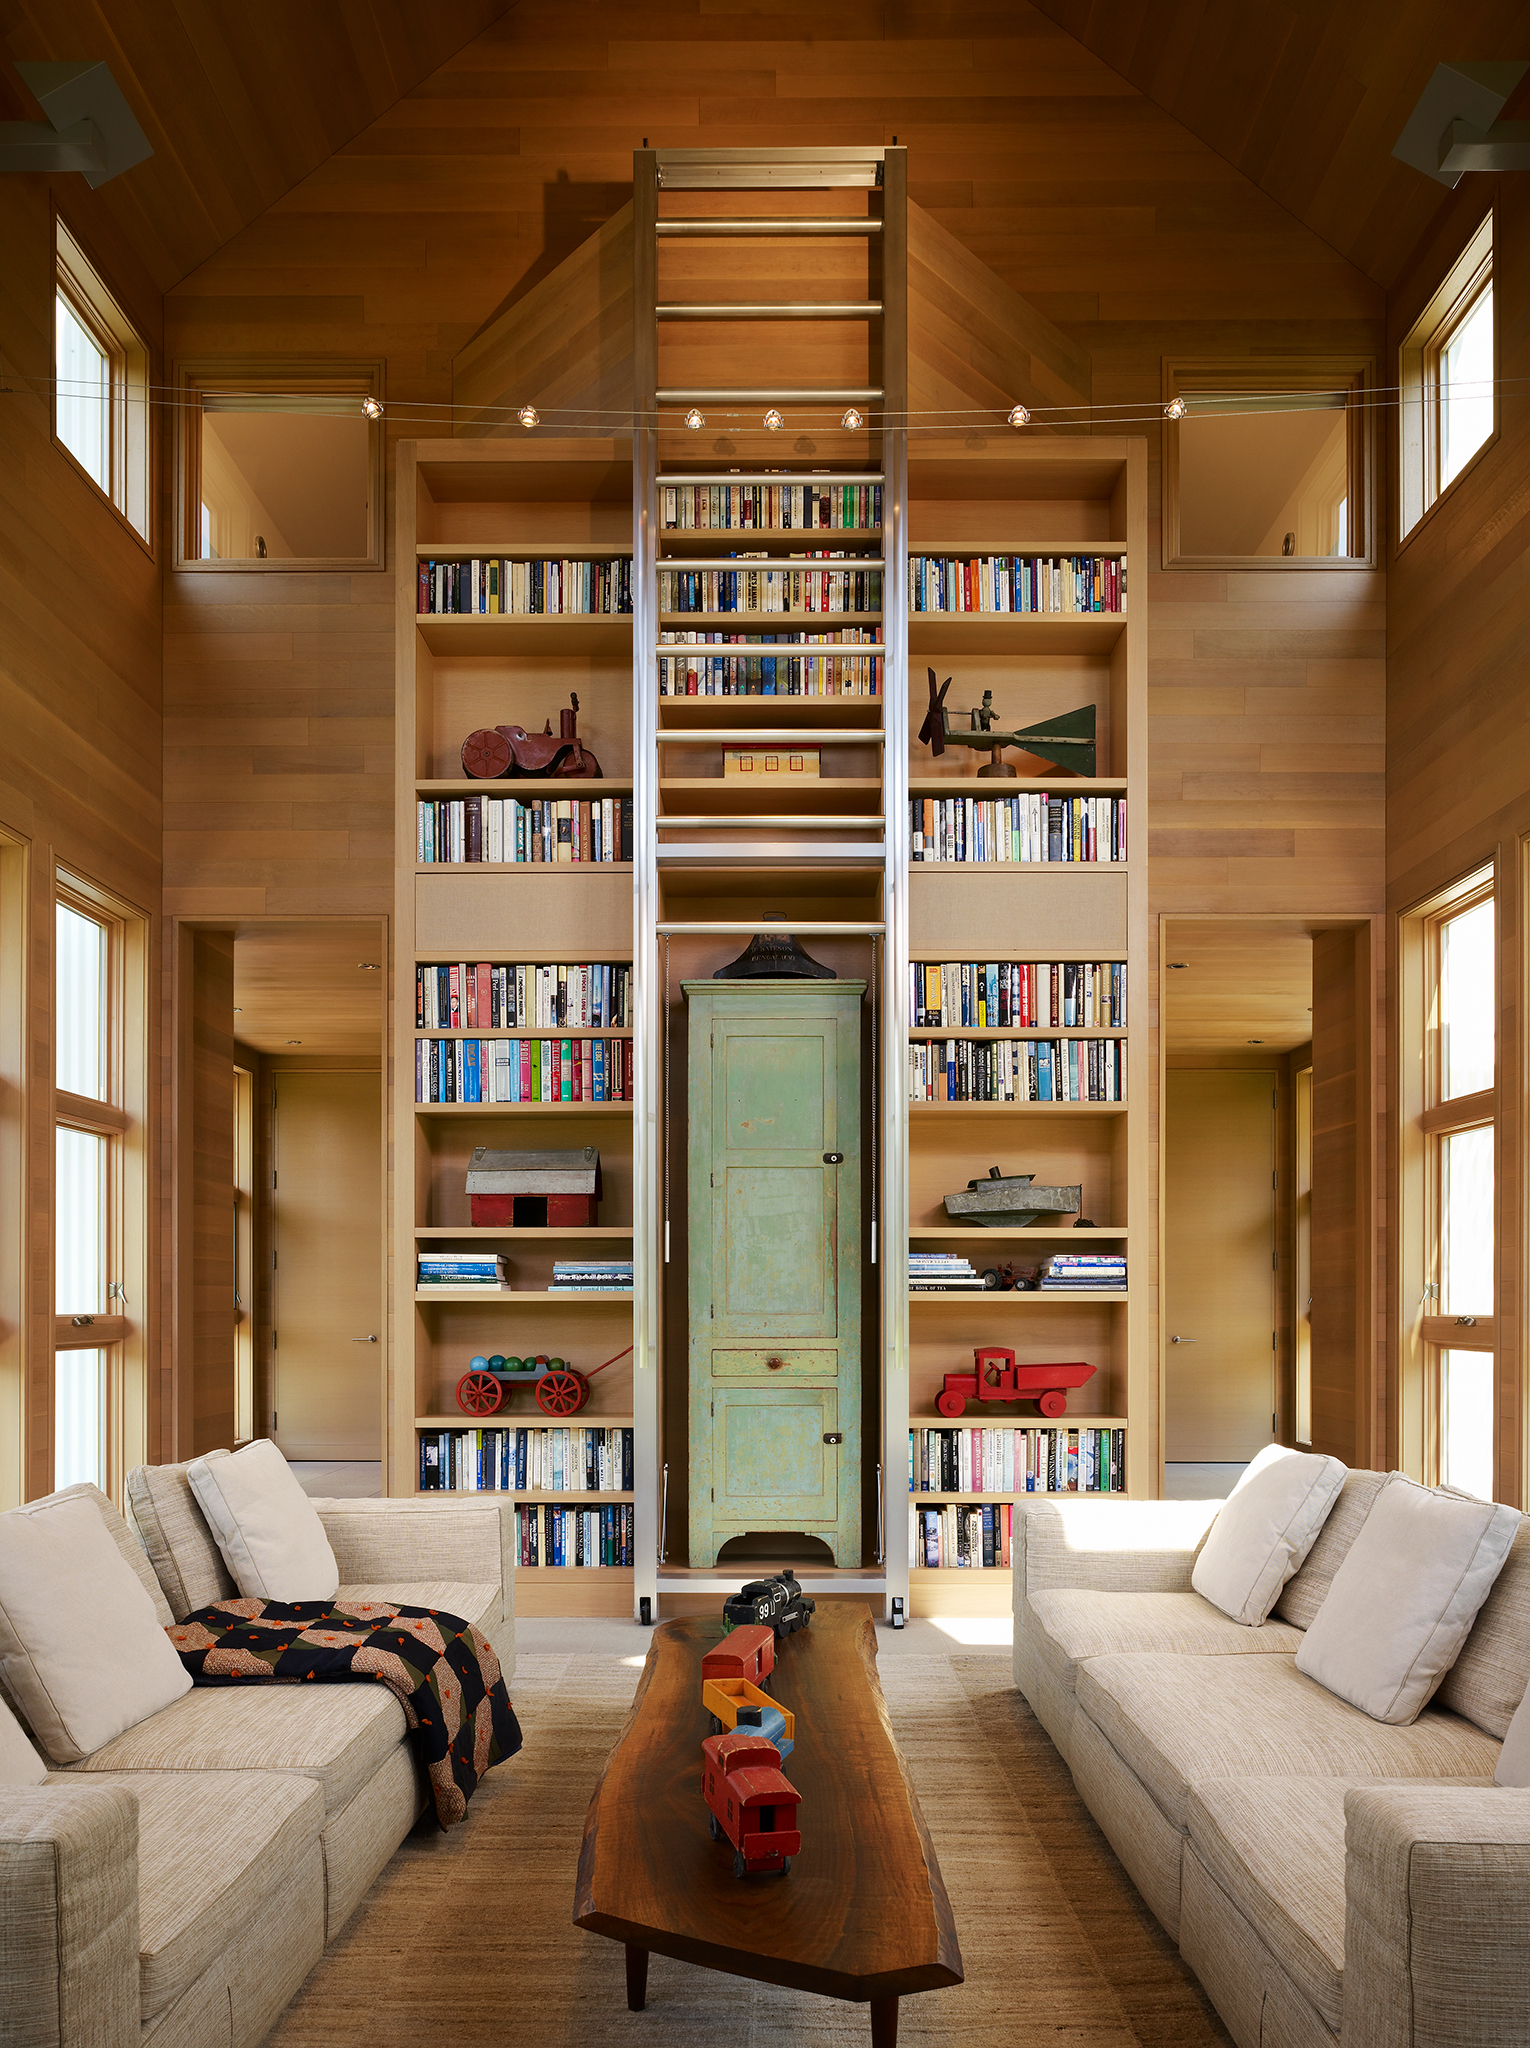  MI Residence  Architectural Digest + Tigerman McCurry  Michigan      Return to Projects  